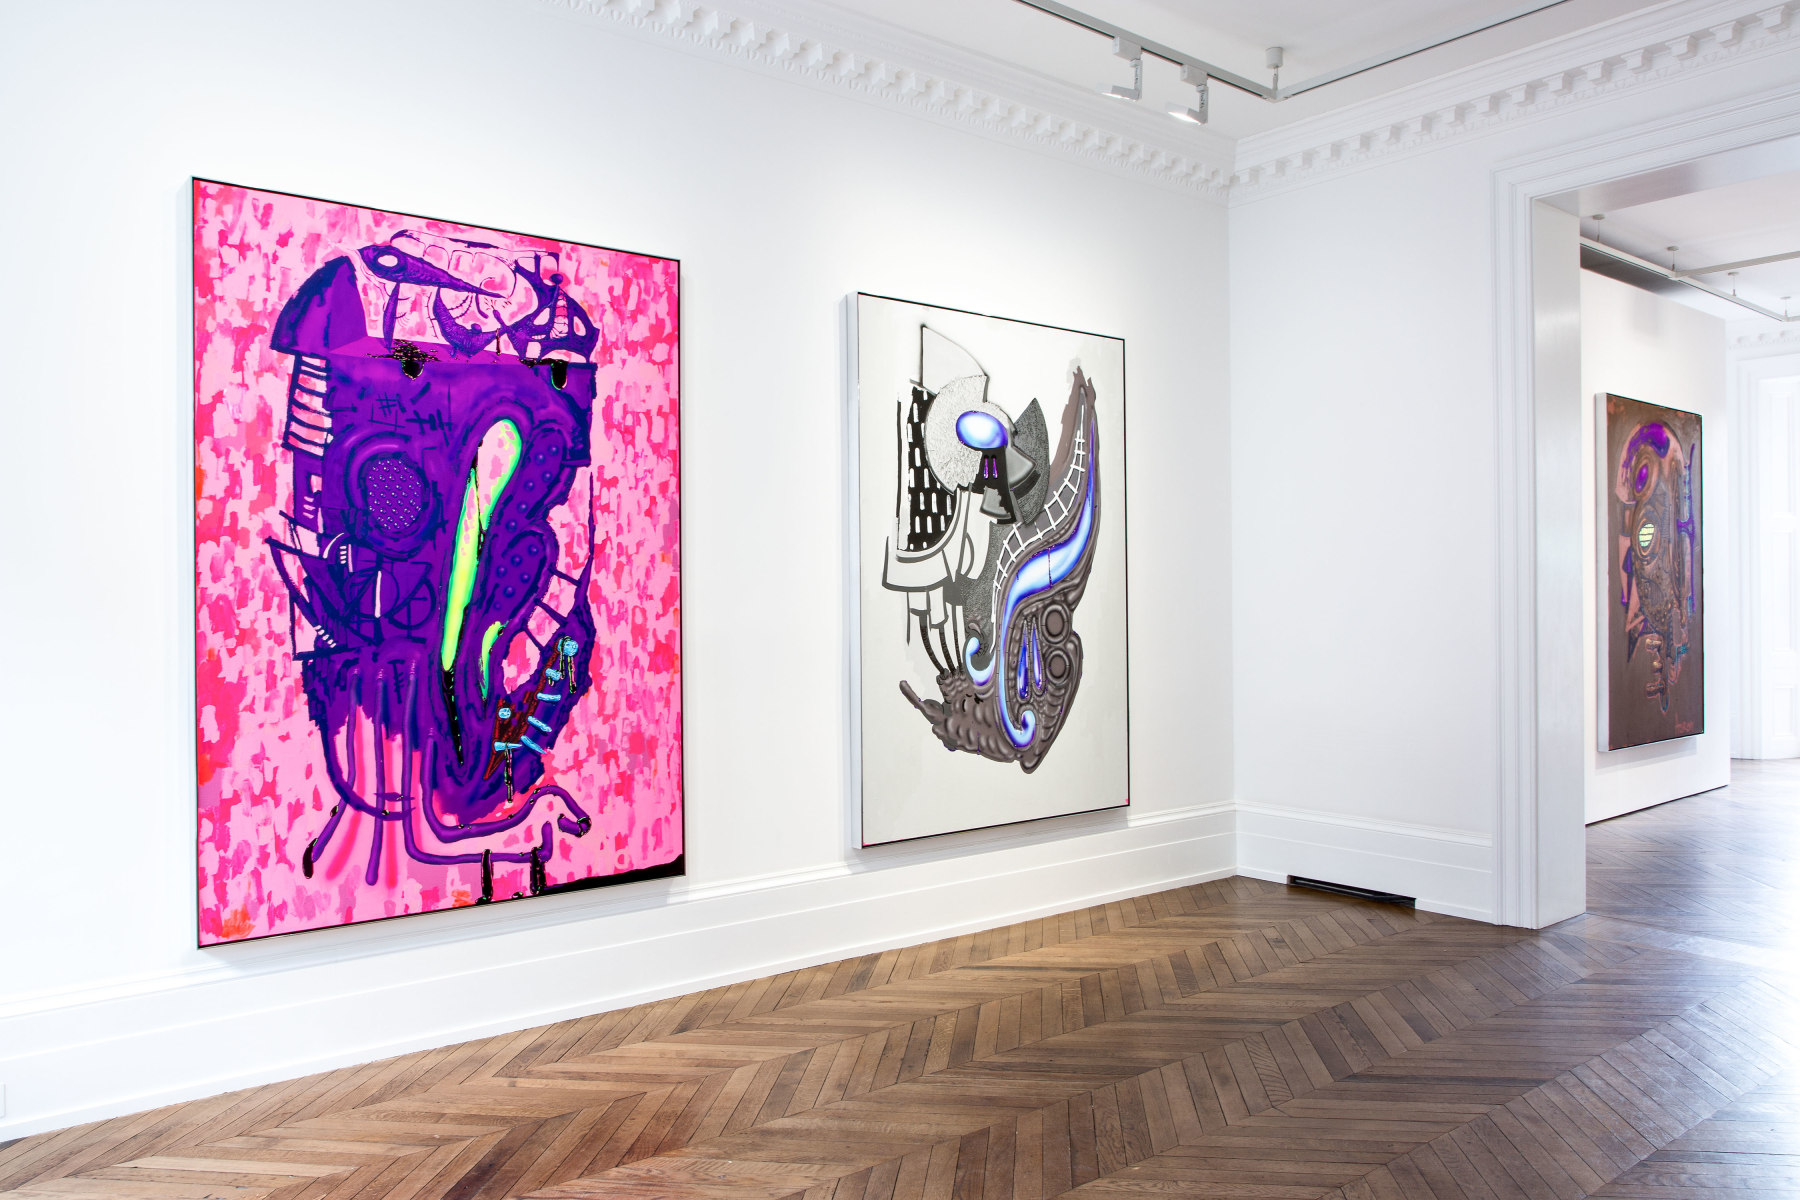 Aaron Curry, Paintings, London, 2014, Installation Image 2